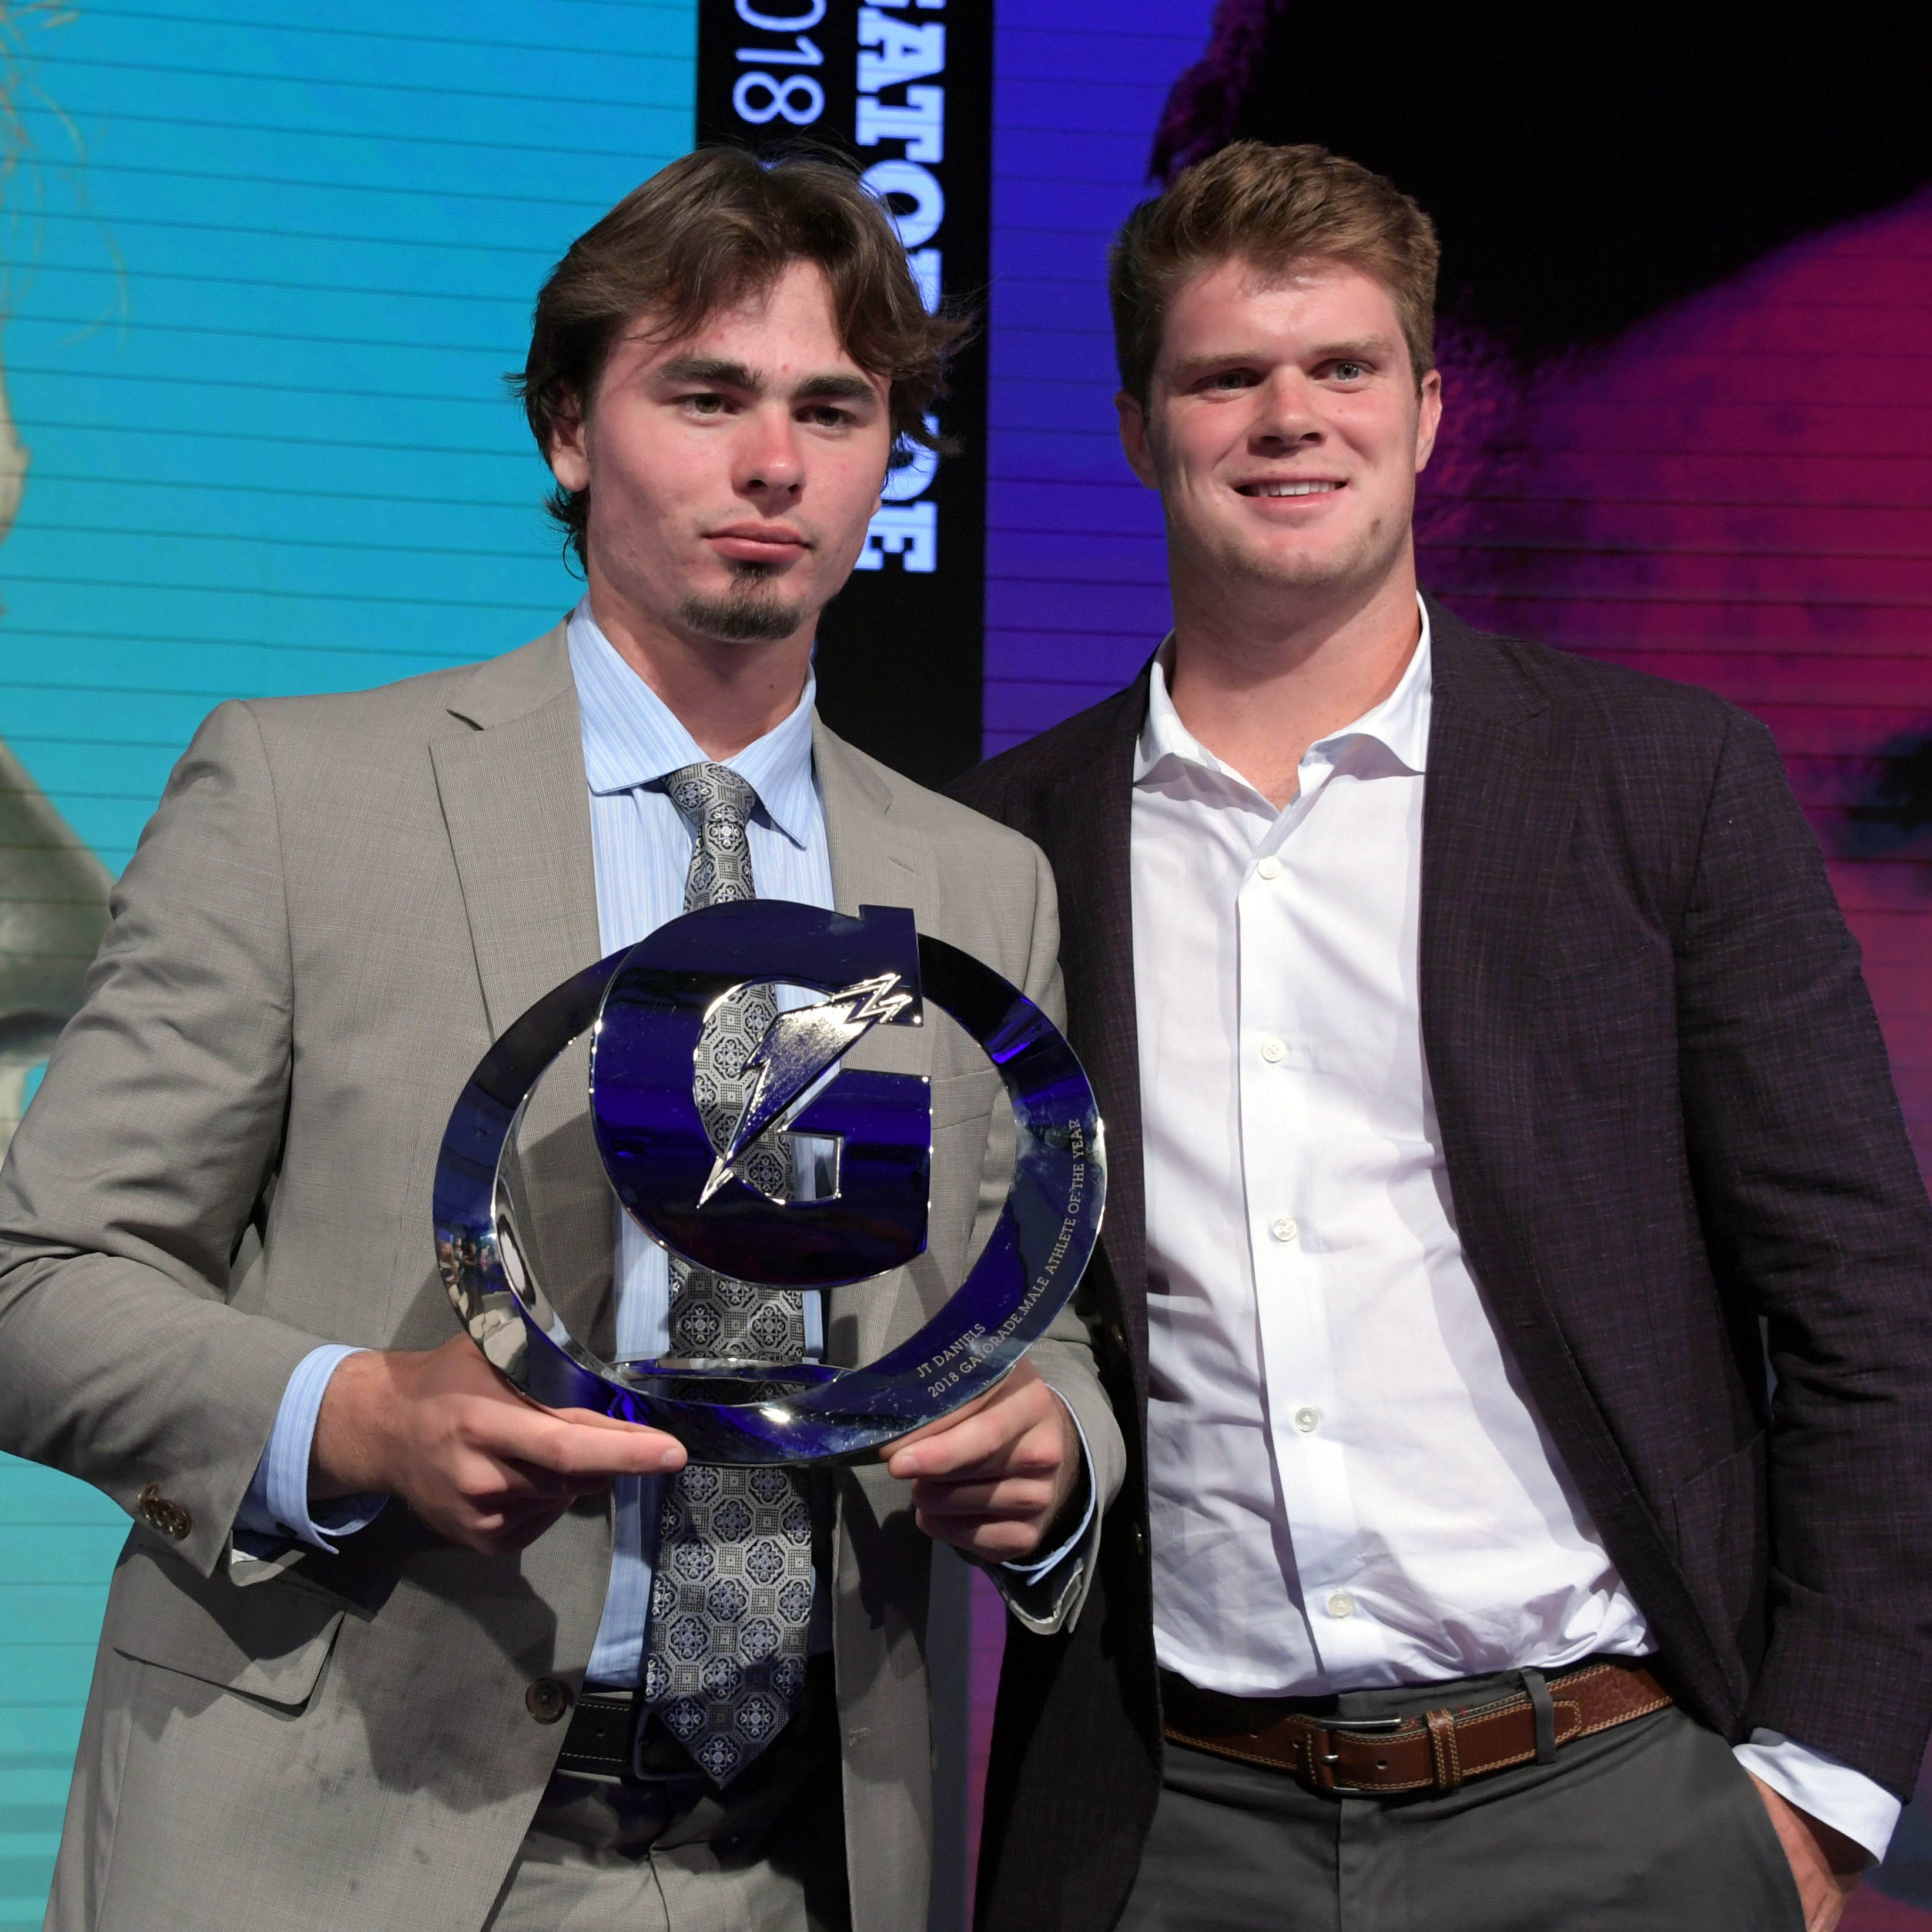 JT Daniels (left) poses with Sam Darnold after being named the male winner during the Gatorade Athlete of the Year Awards.